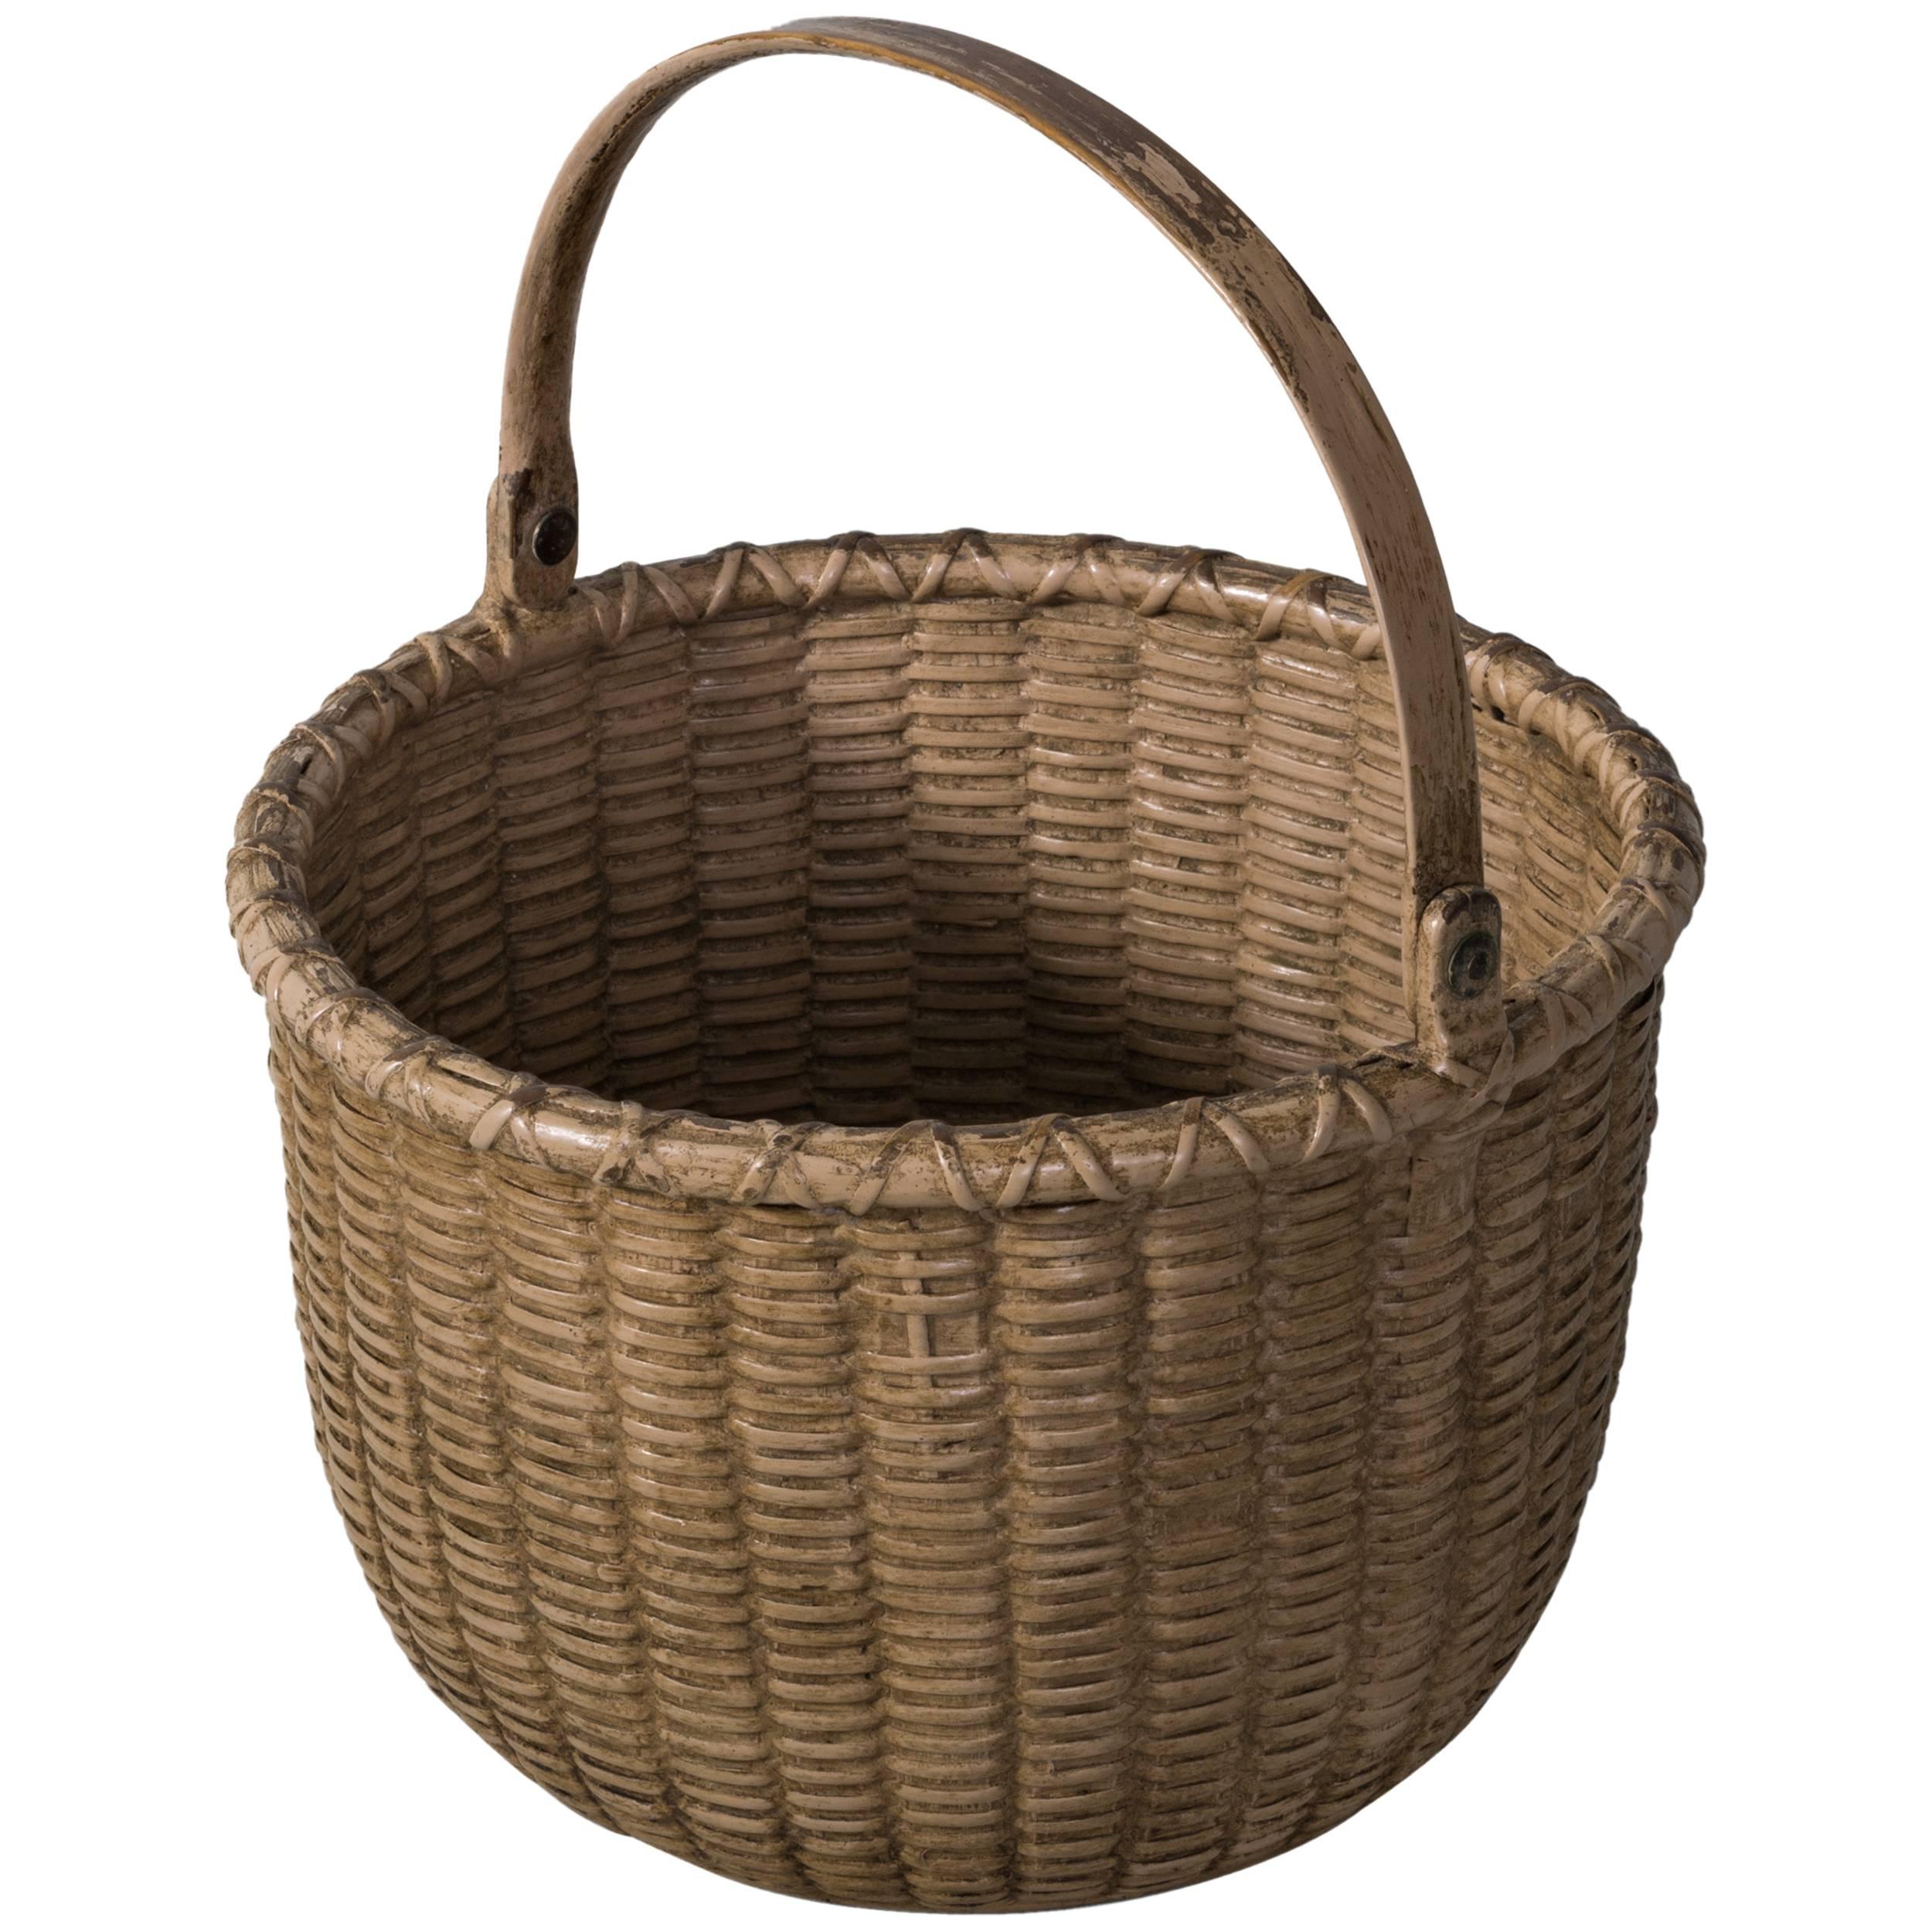 Early Salmon Painted Nantucket Light Ship Basket, Late 19th Century For Sale